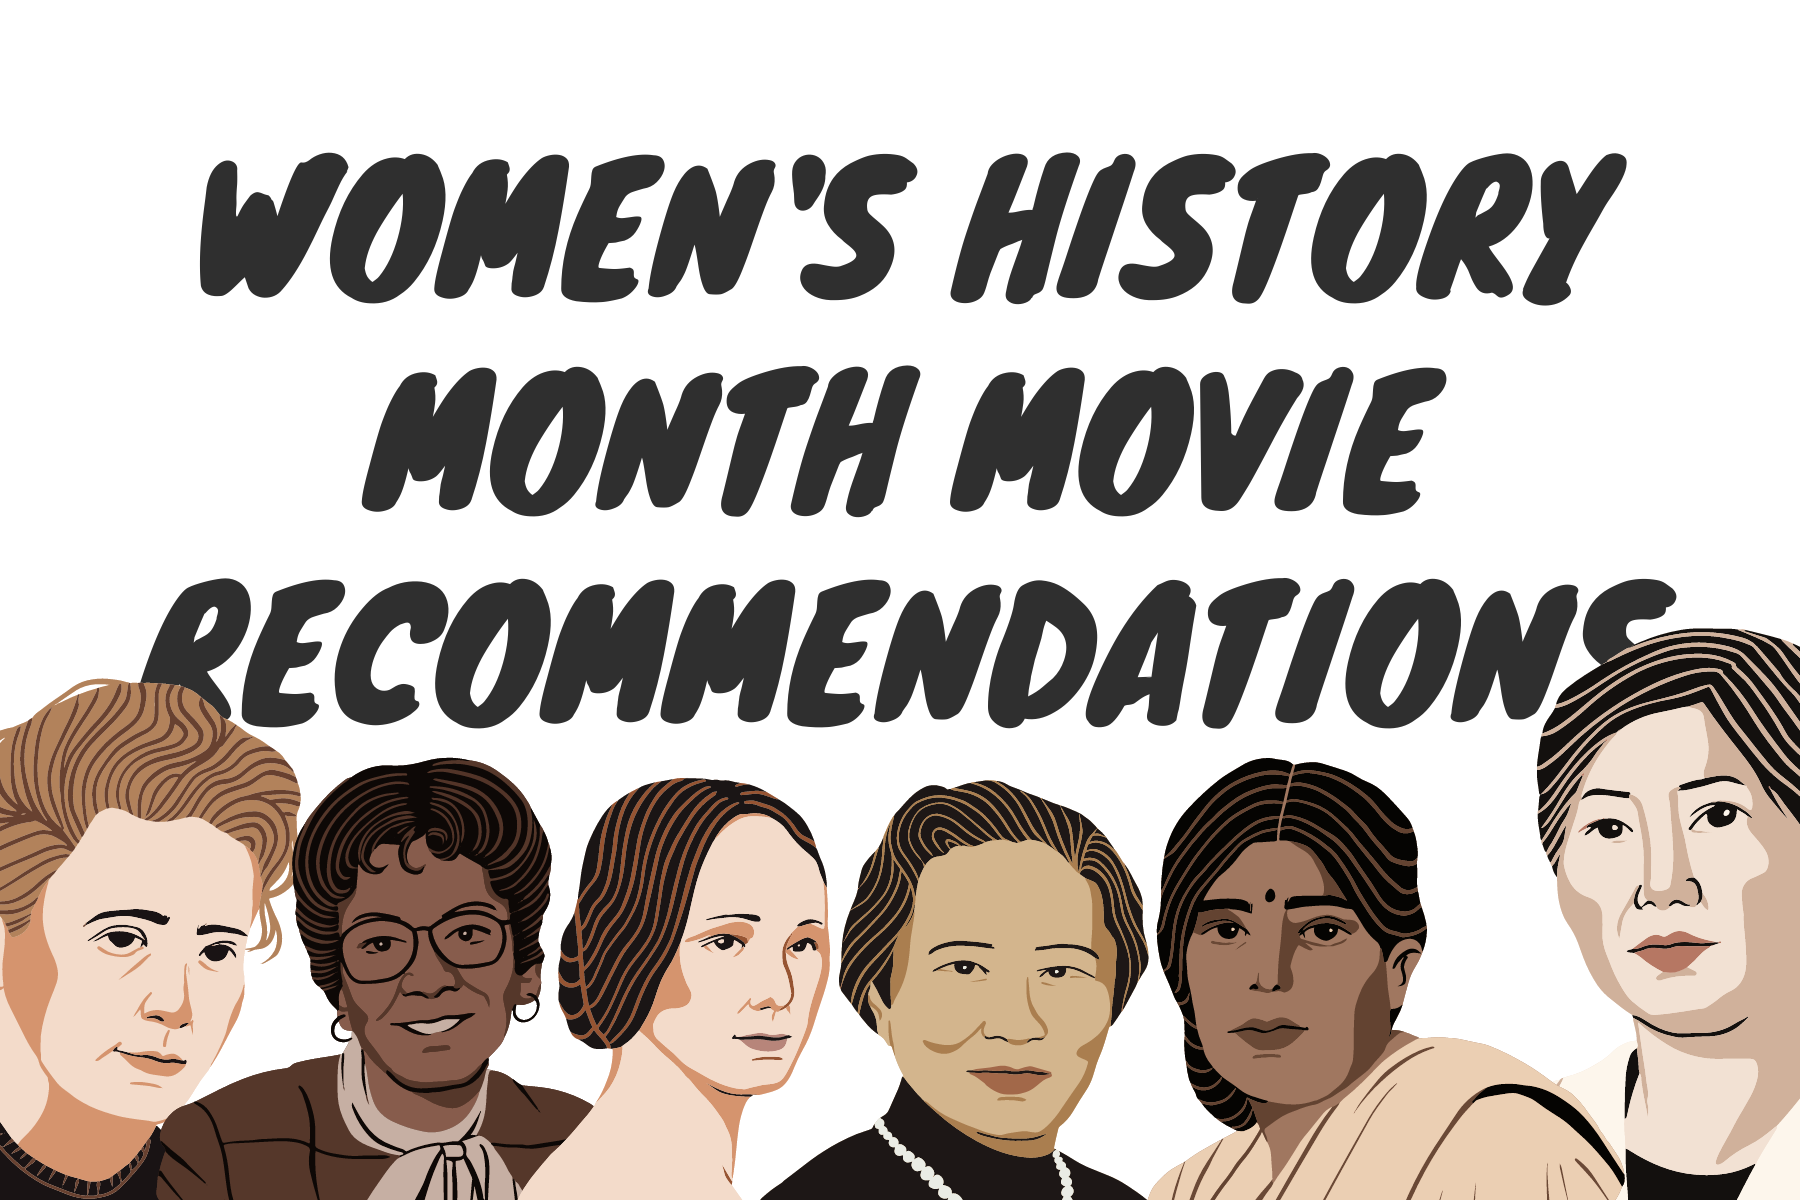 Women’s History Movie Recommendations